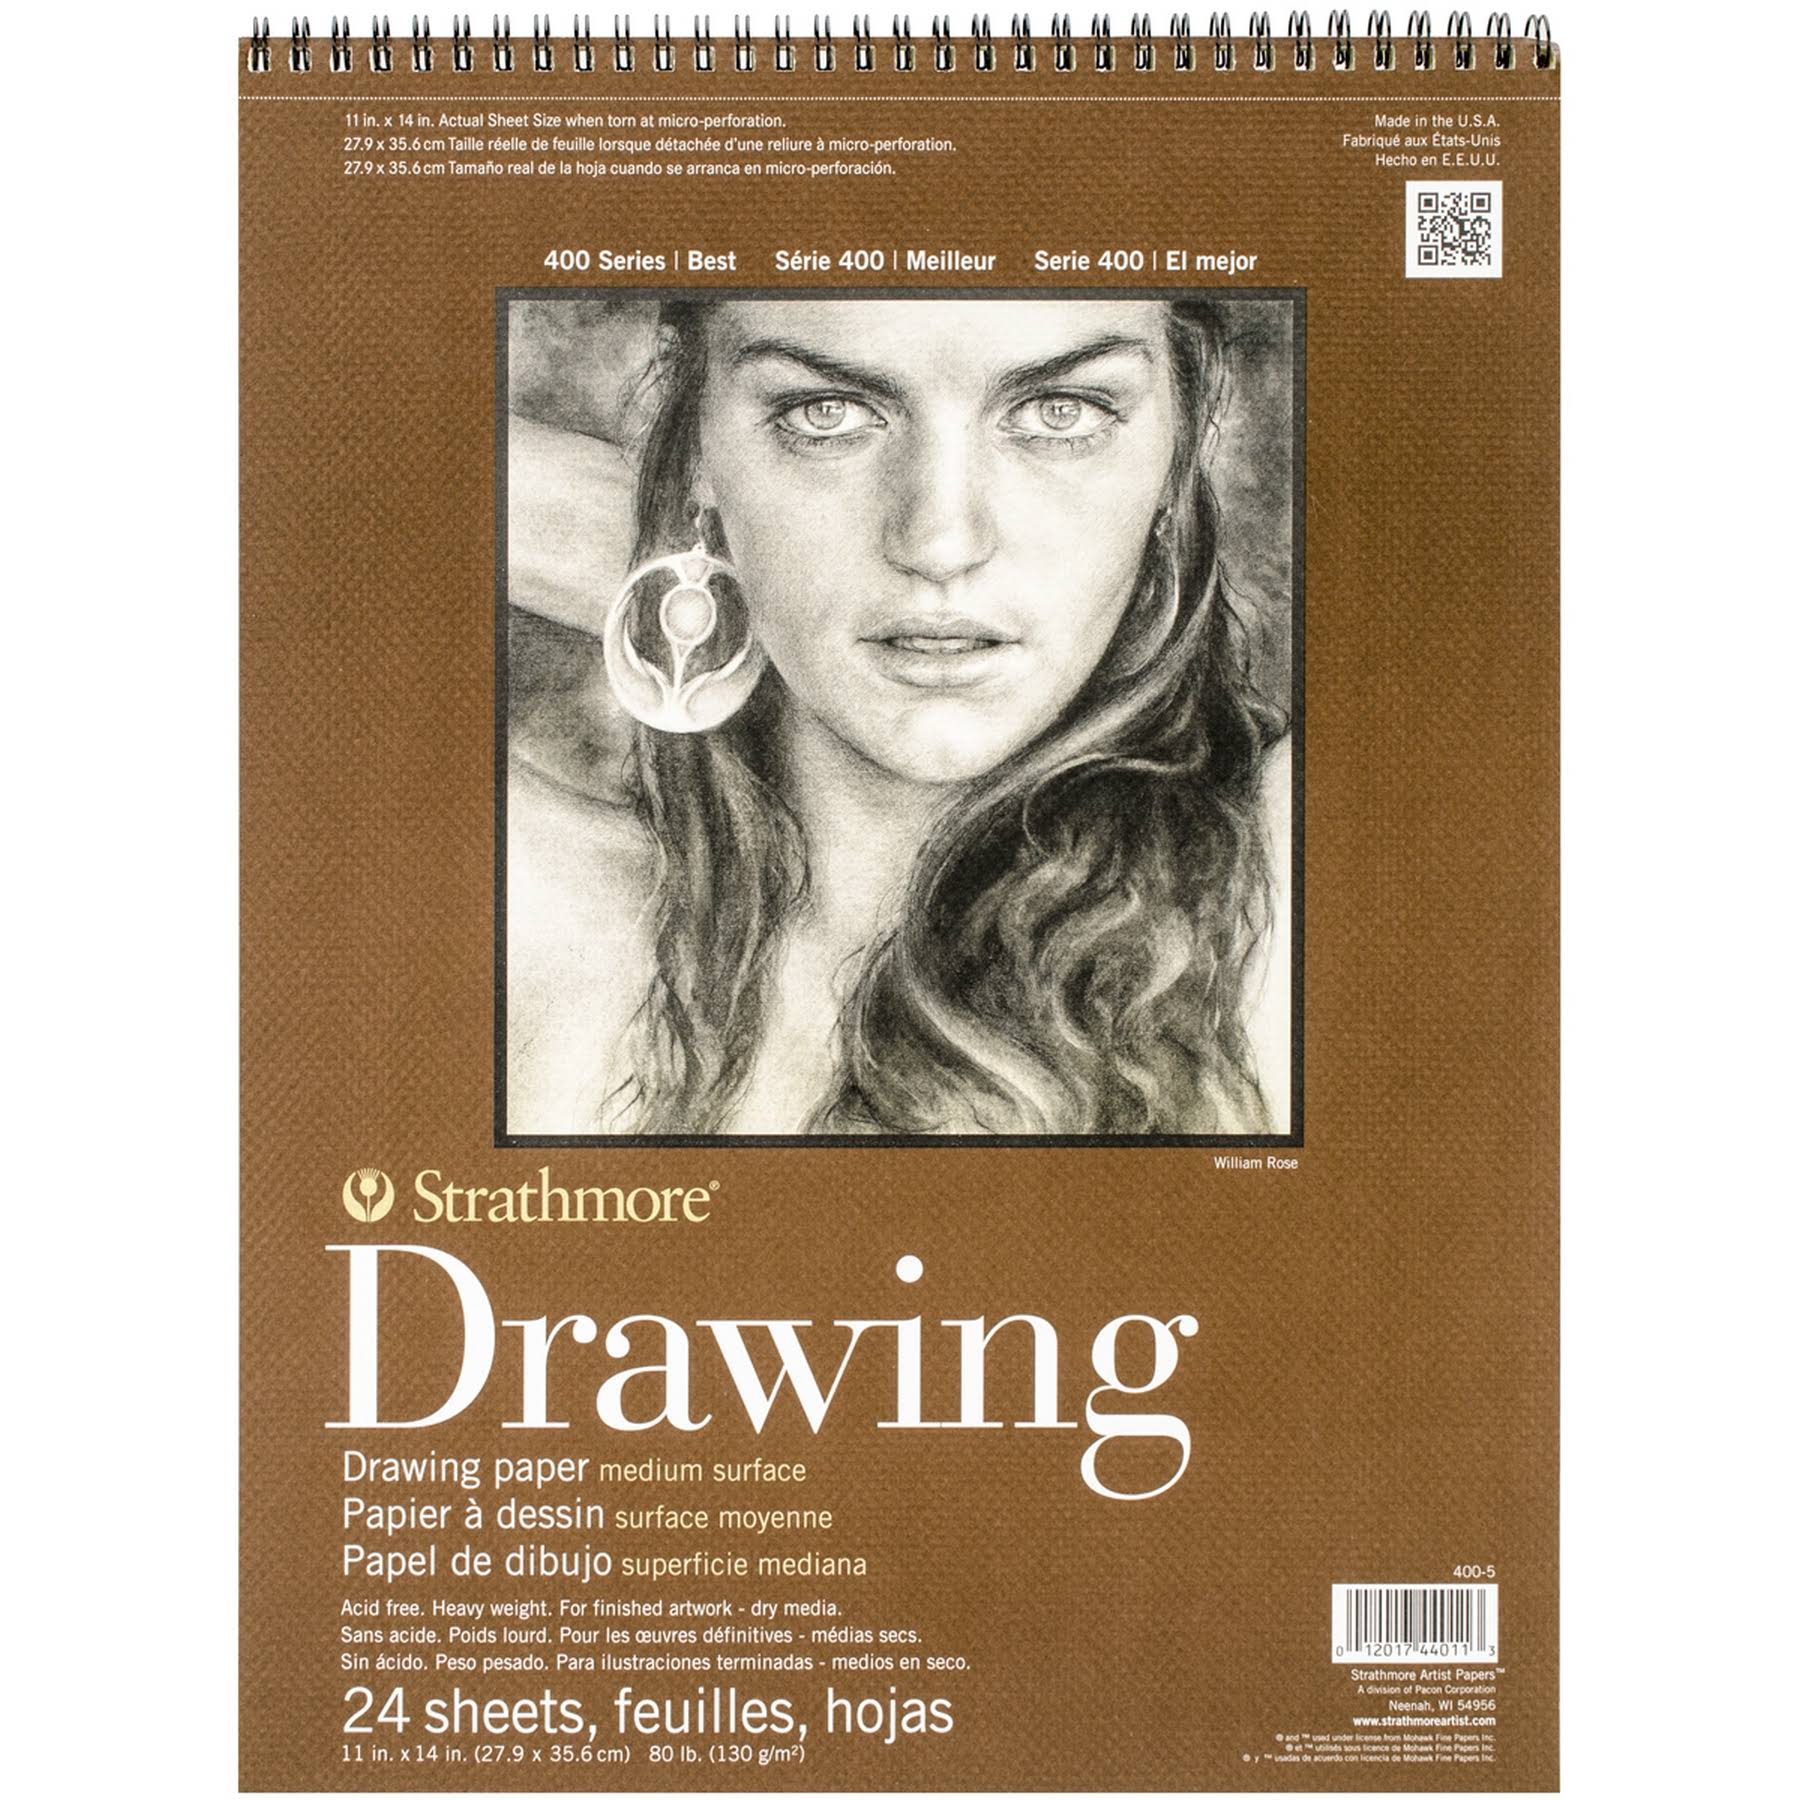 Strathmore Drawing Paper - 24 Sheets